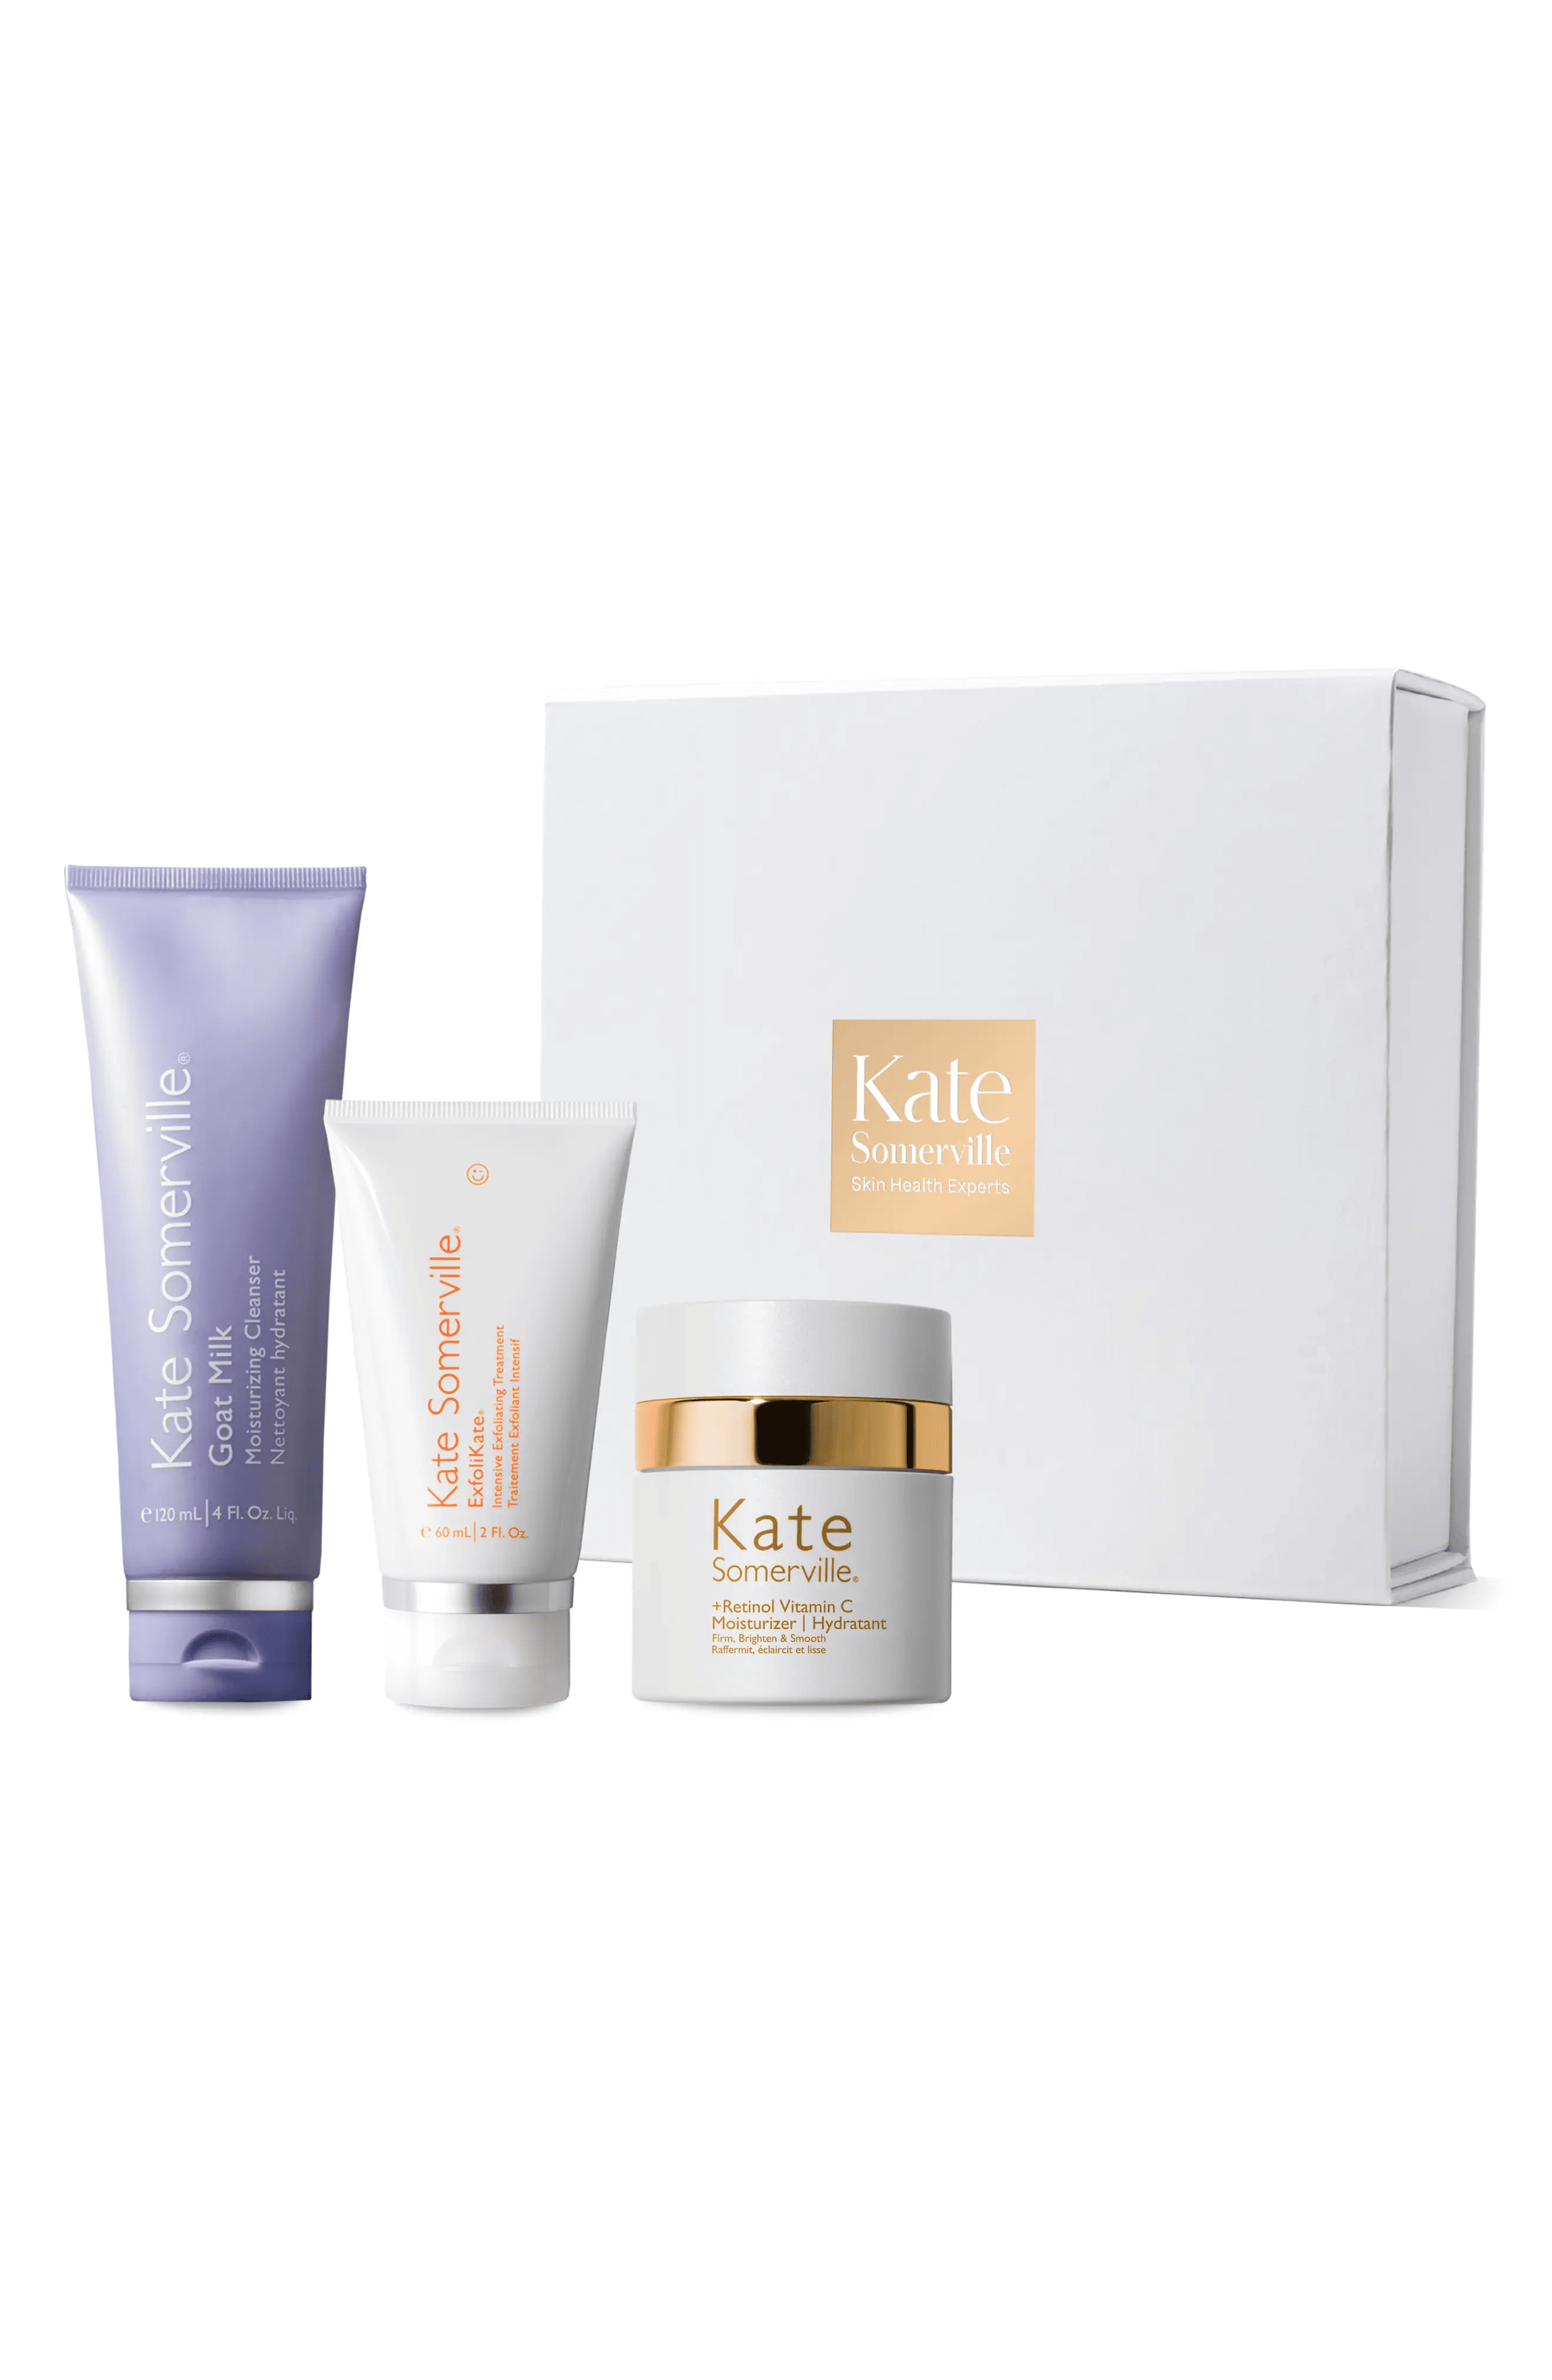 Image featuring Radiant Skin Set by
Kate Somerville in winter beauty essentials for mature women